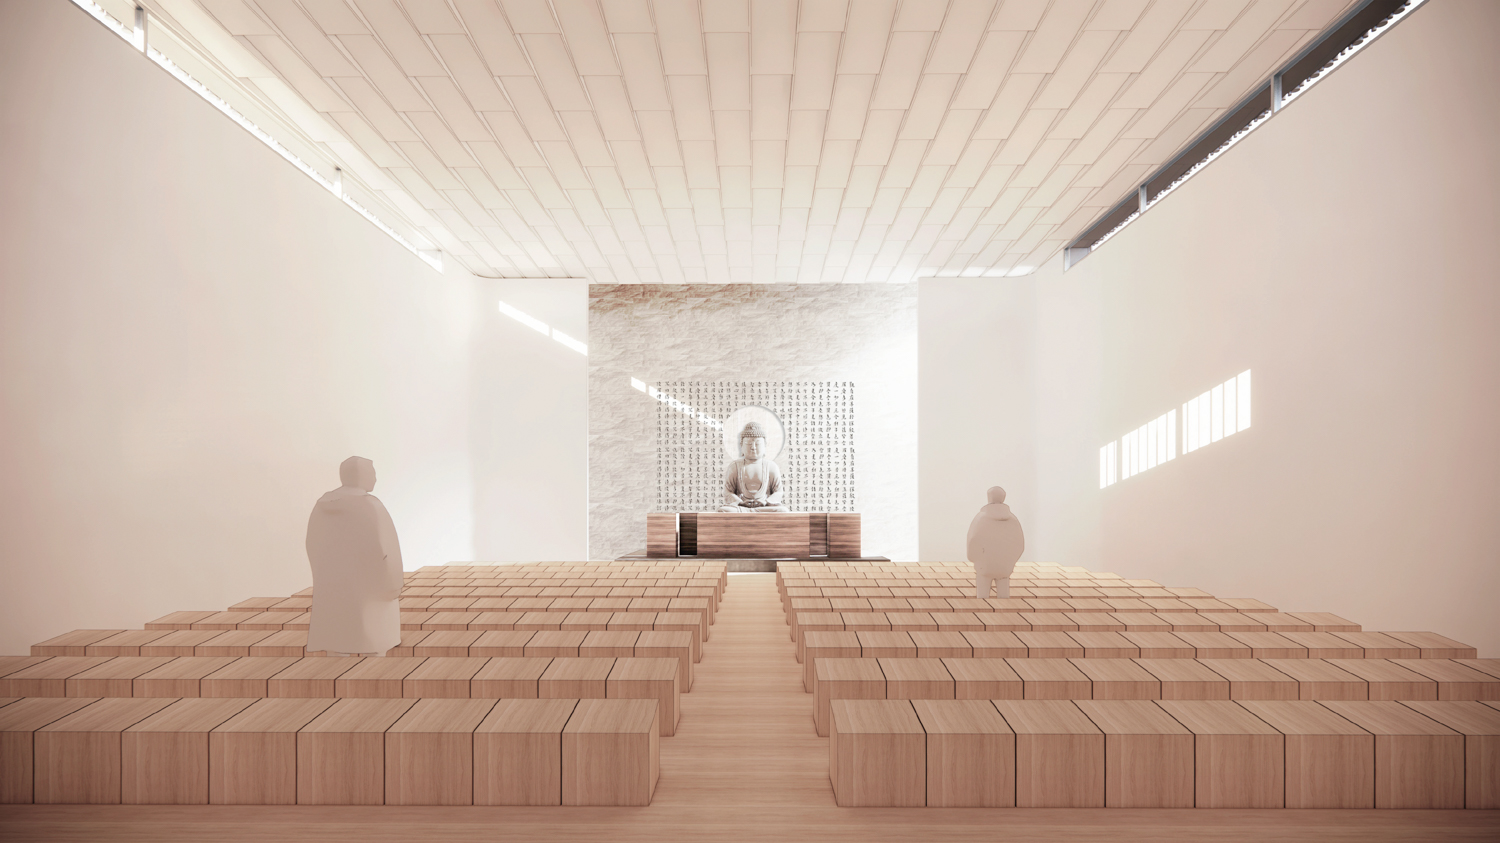 Proposed shrine room for the American Buddhist Cultural Society rendering for 1750 Van Ness Avenue, design by Skidmore, Owings & Merrill